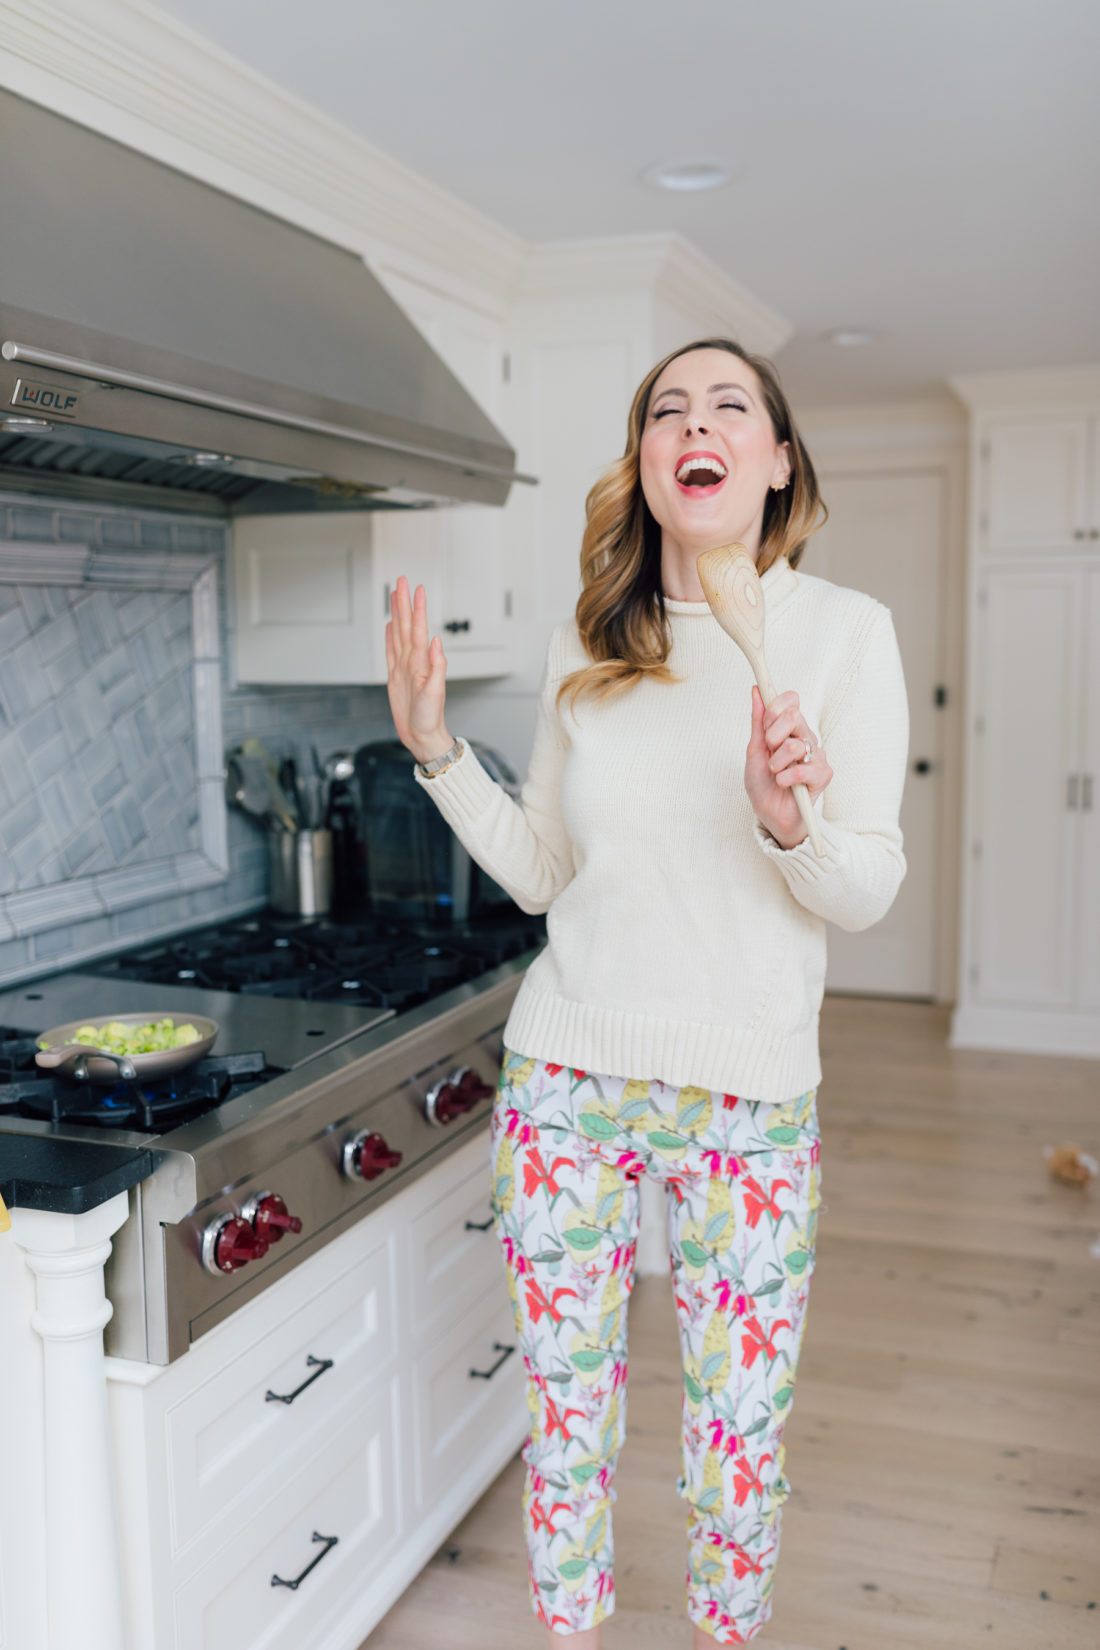 Eva Amurri Martino sautes onions for her Brussels Sprouts side dish